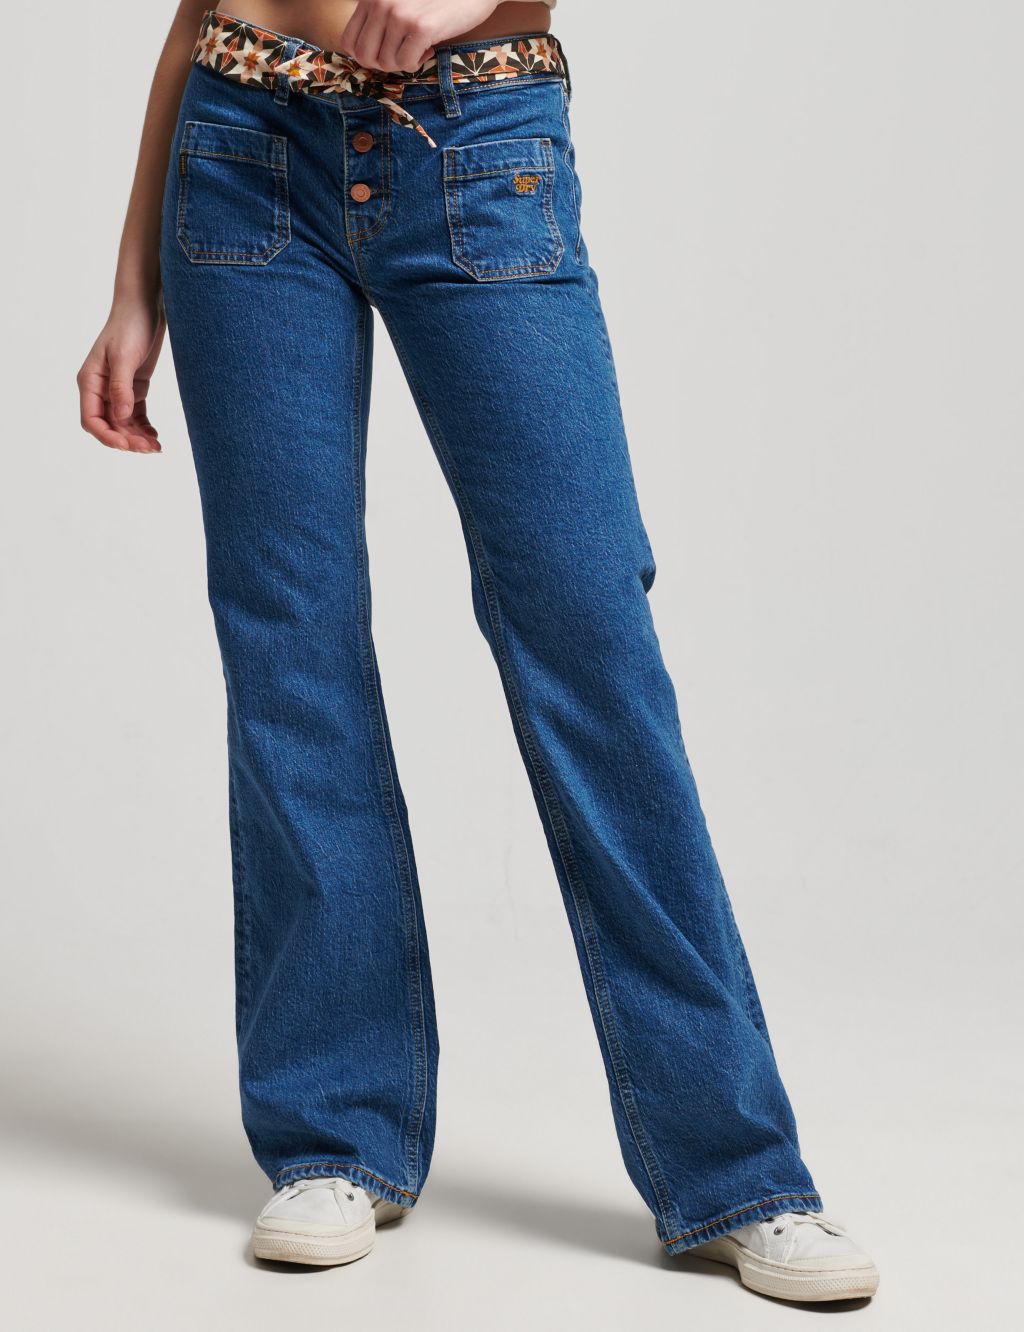 Button Front Flared Jeans 1 of 8